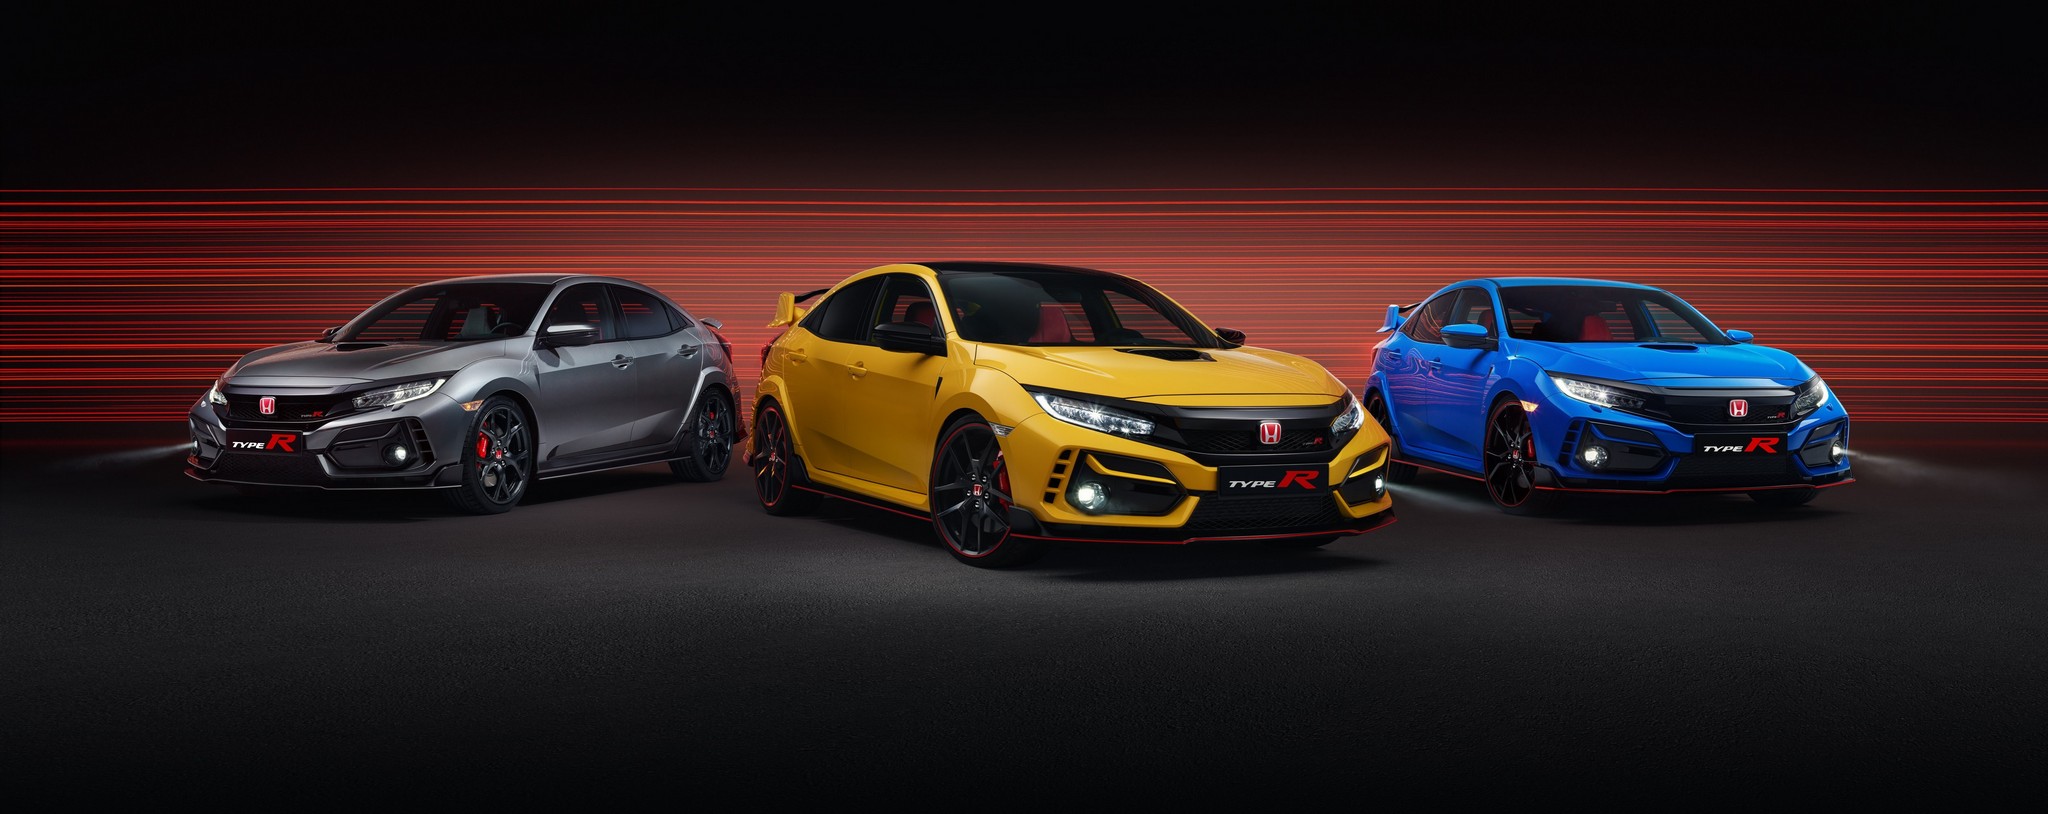 2020 Civic Type R Range - Type R Sport Line & Type R Limited Edition & Type R GT